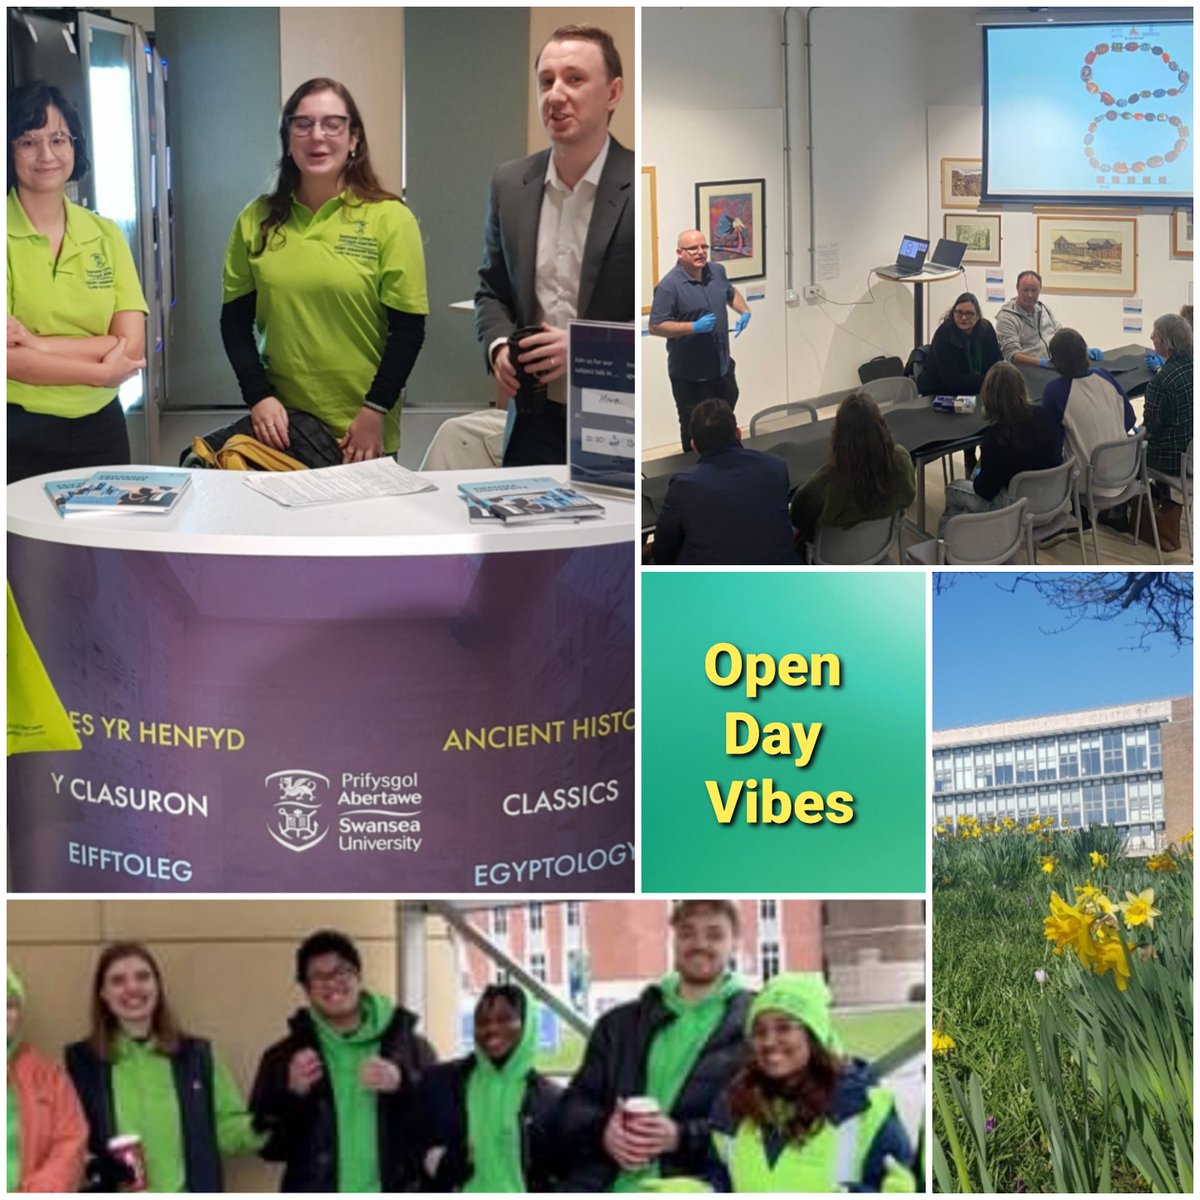 It's been a great day so far: fantastic to welcome all our visitors. If you haven't come to see us yet, there is still a chance in the afternoon. #openday @swanseauni @suculture_comm